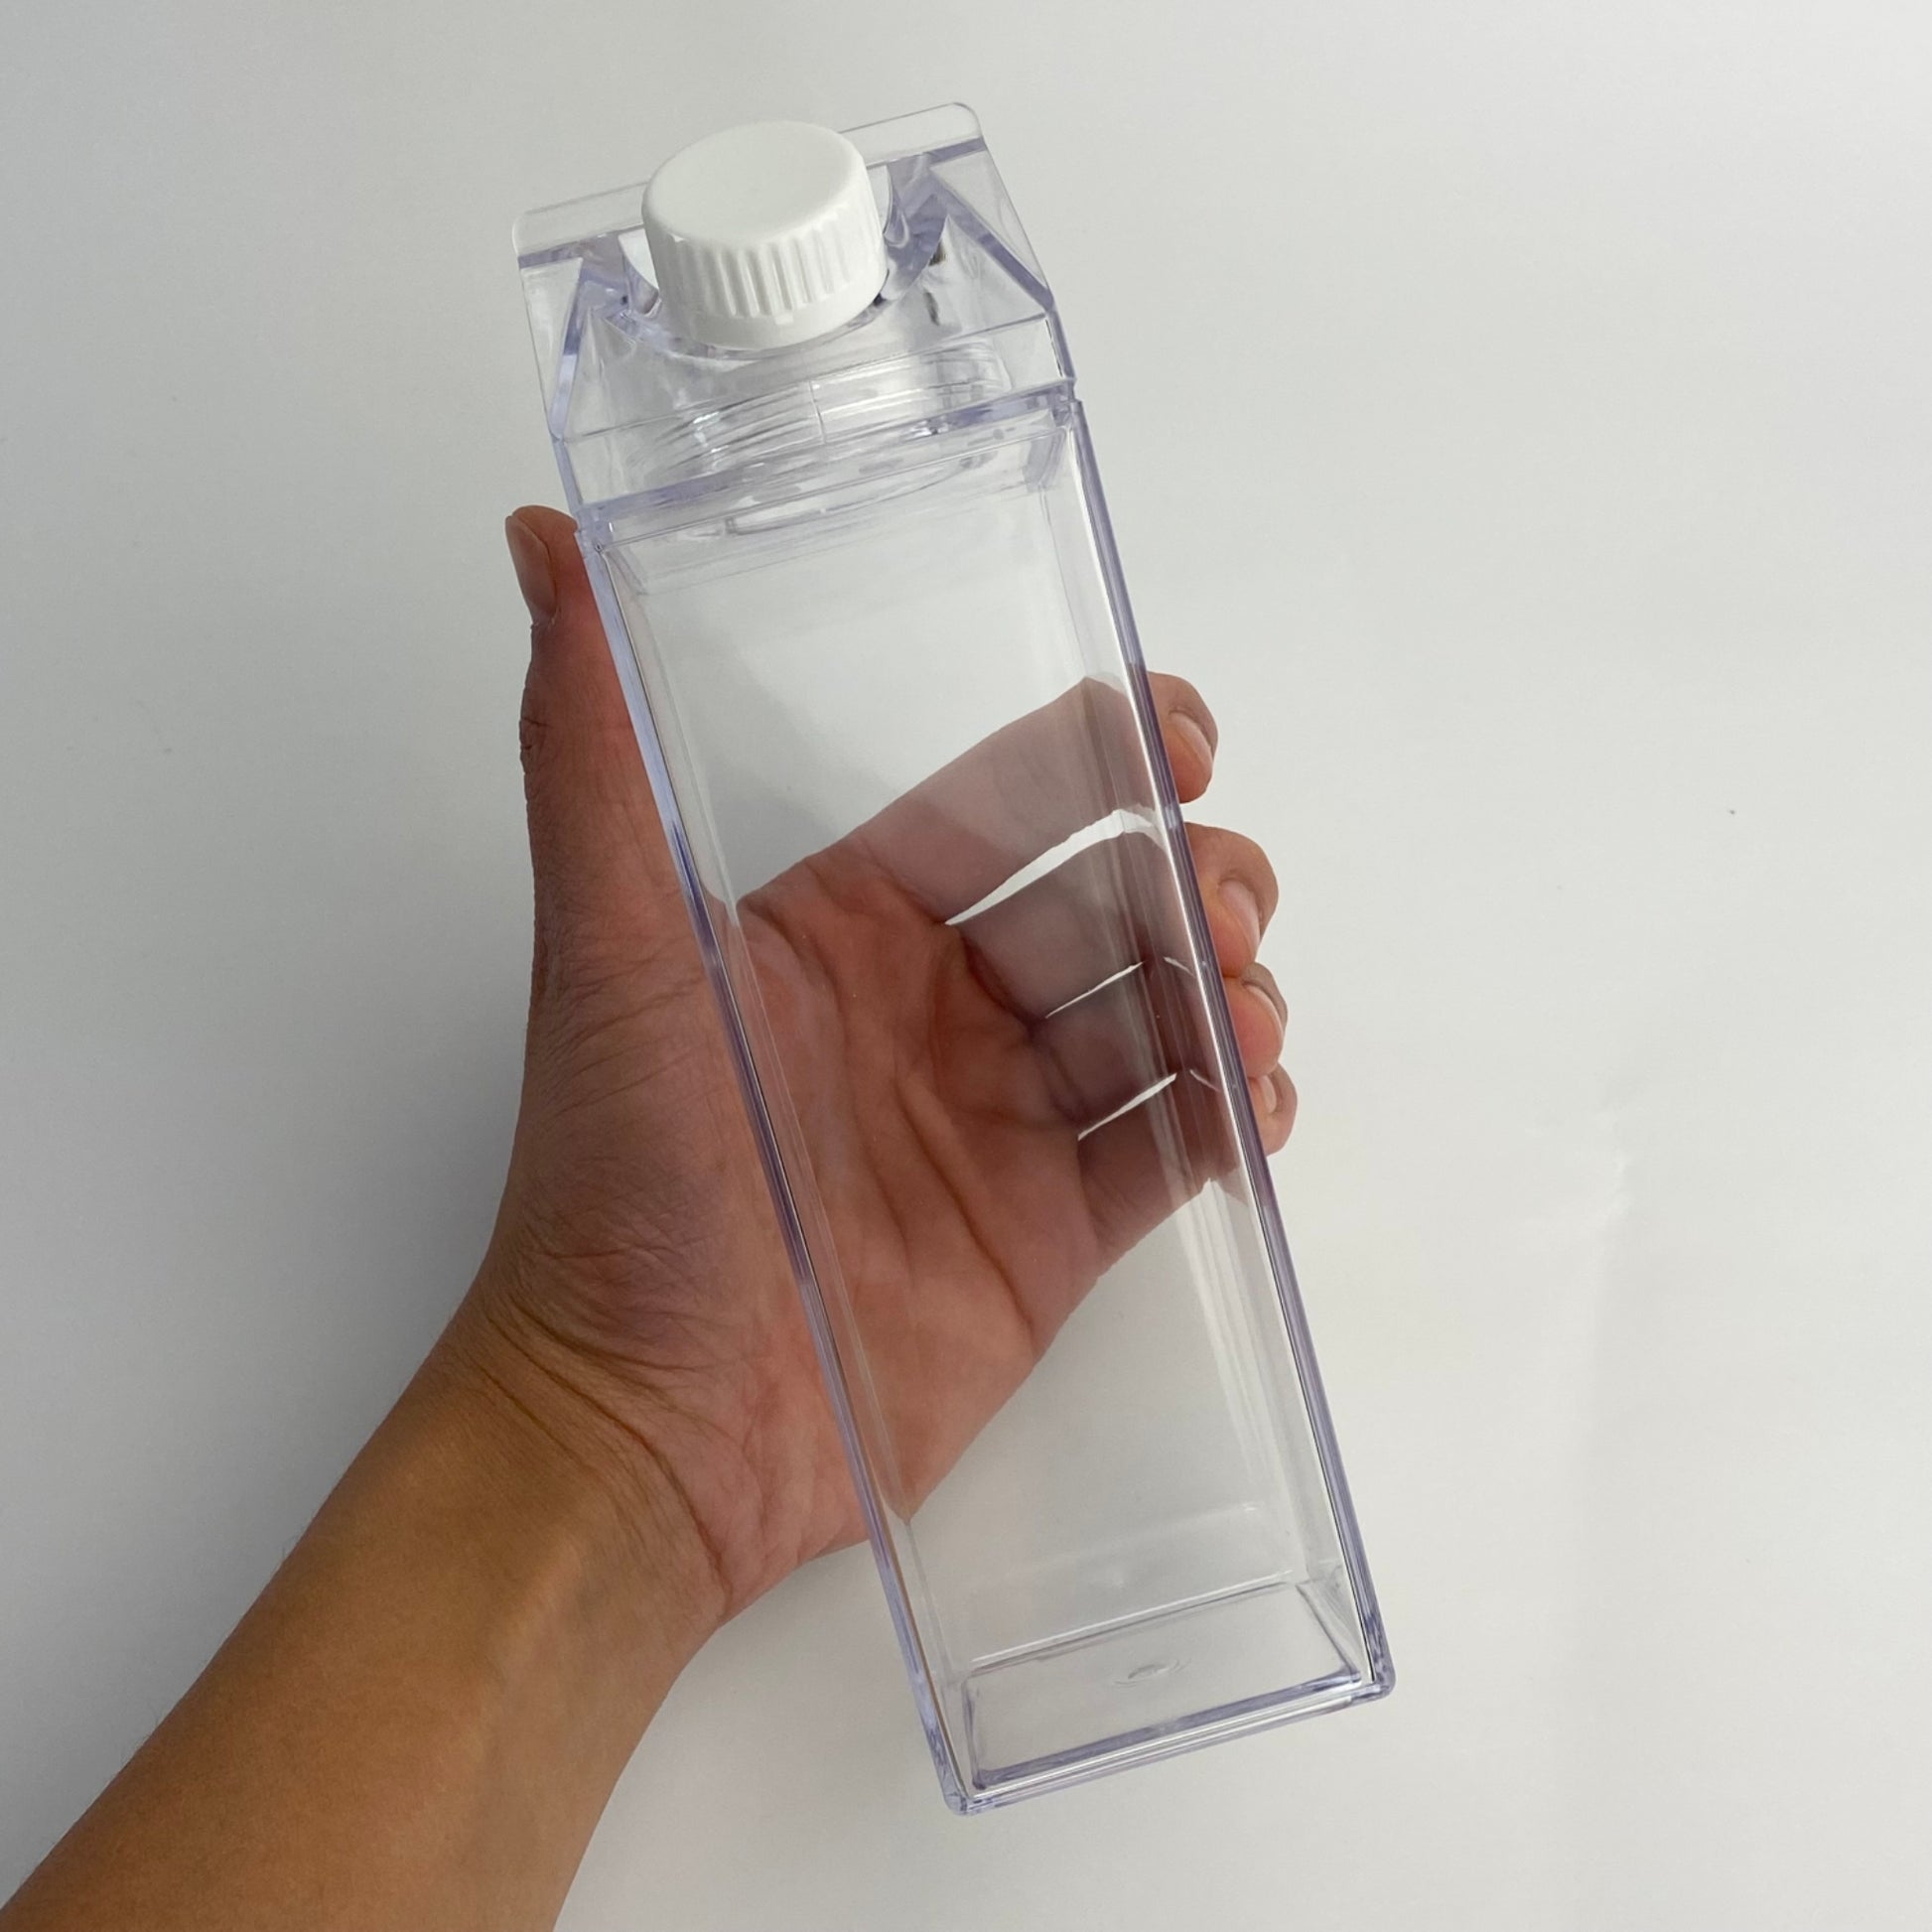 16 oz. Milk Carton, Sizing comparison with Hand,Wholesale Blank Tumblers Canada